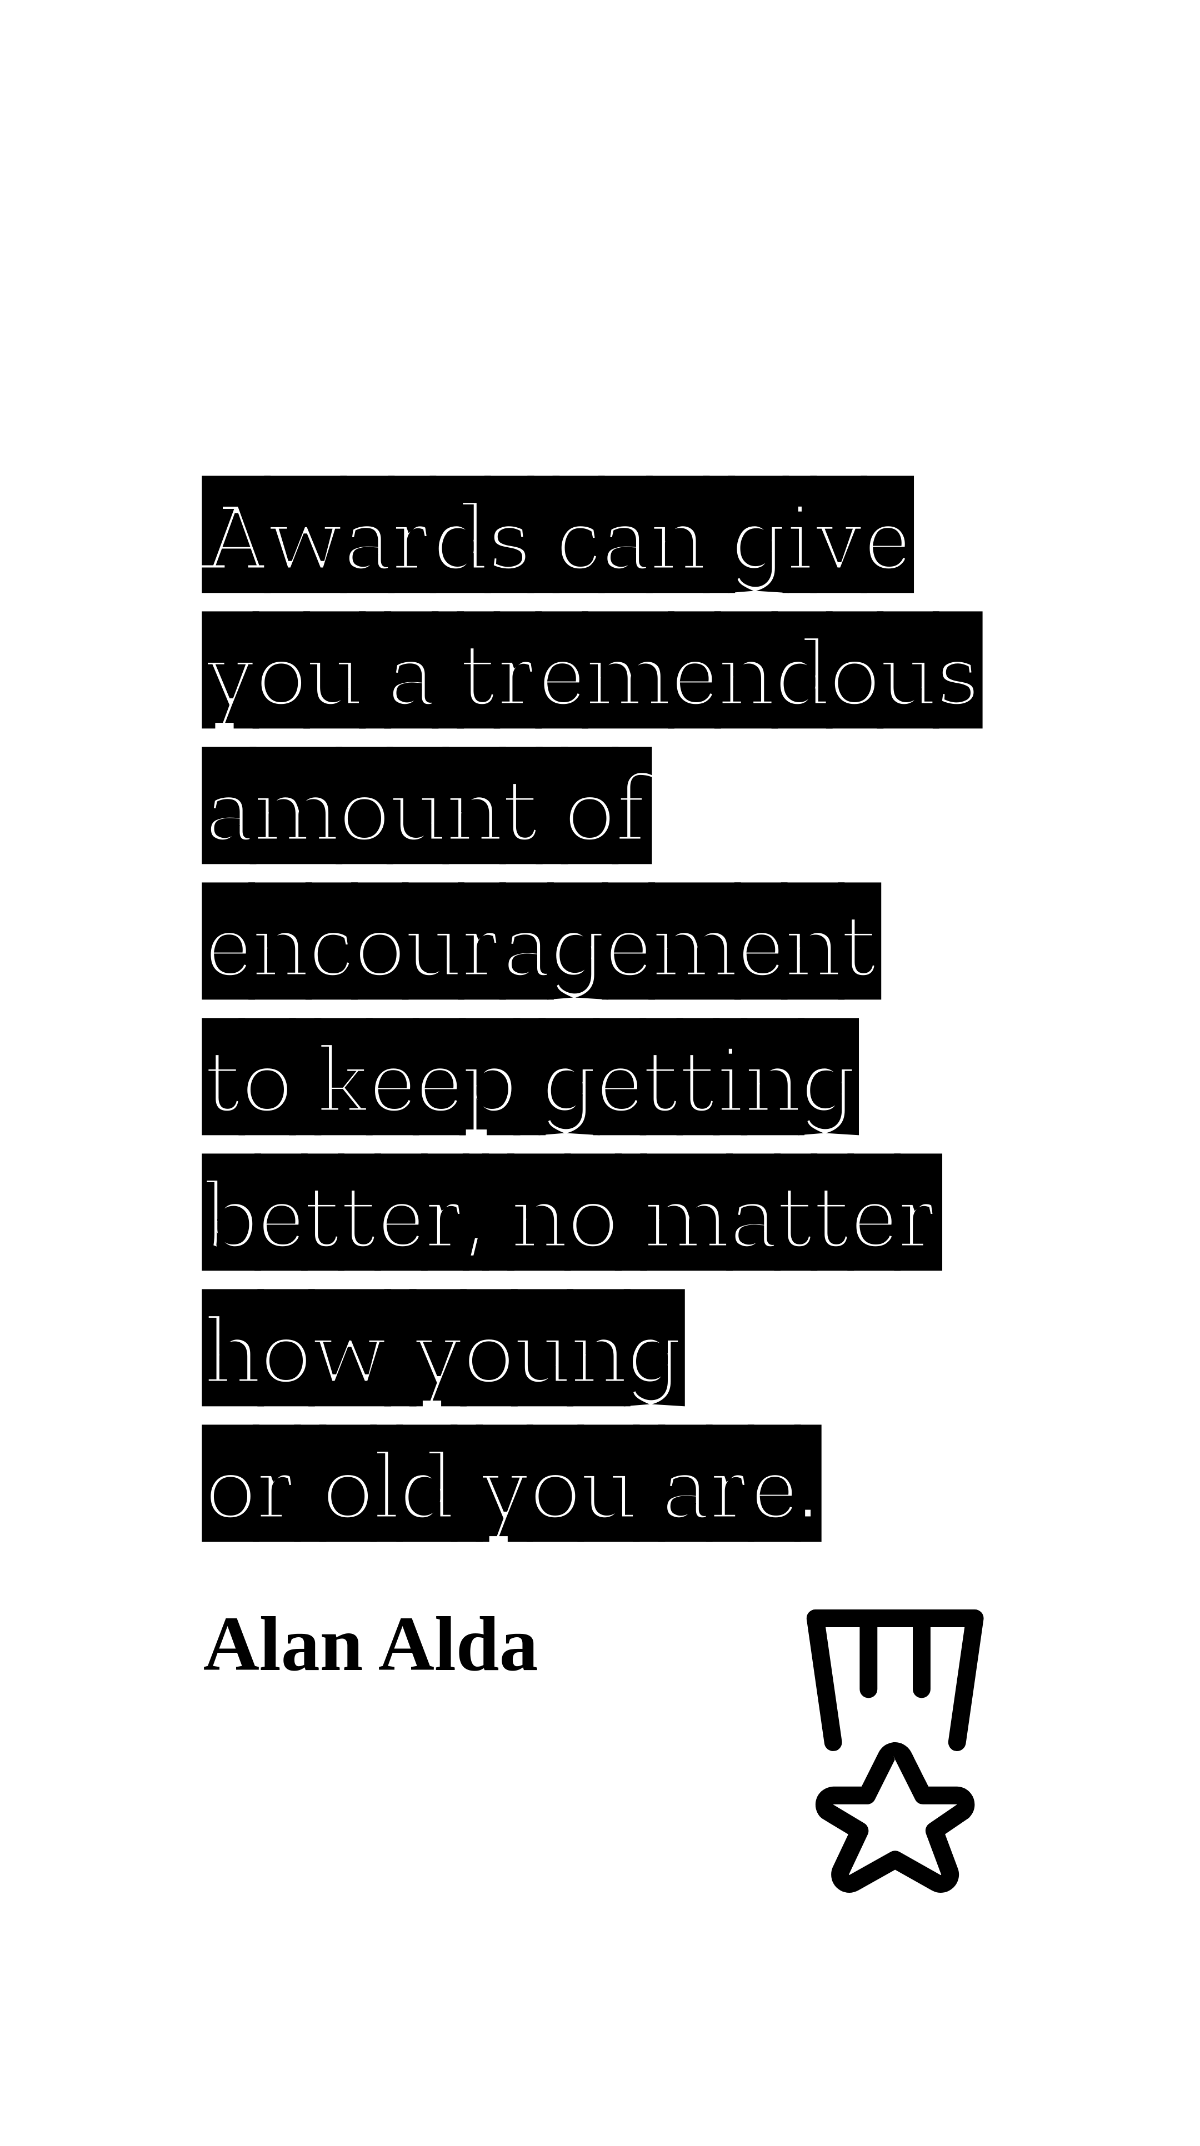 Alan Alda - Awards can give you a tremendous amount of encouragement to keep getting better, no matter how young or old you are. Template